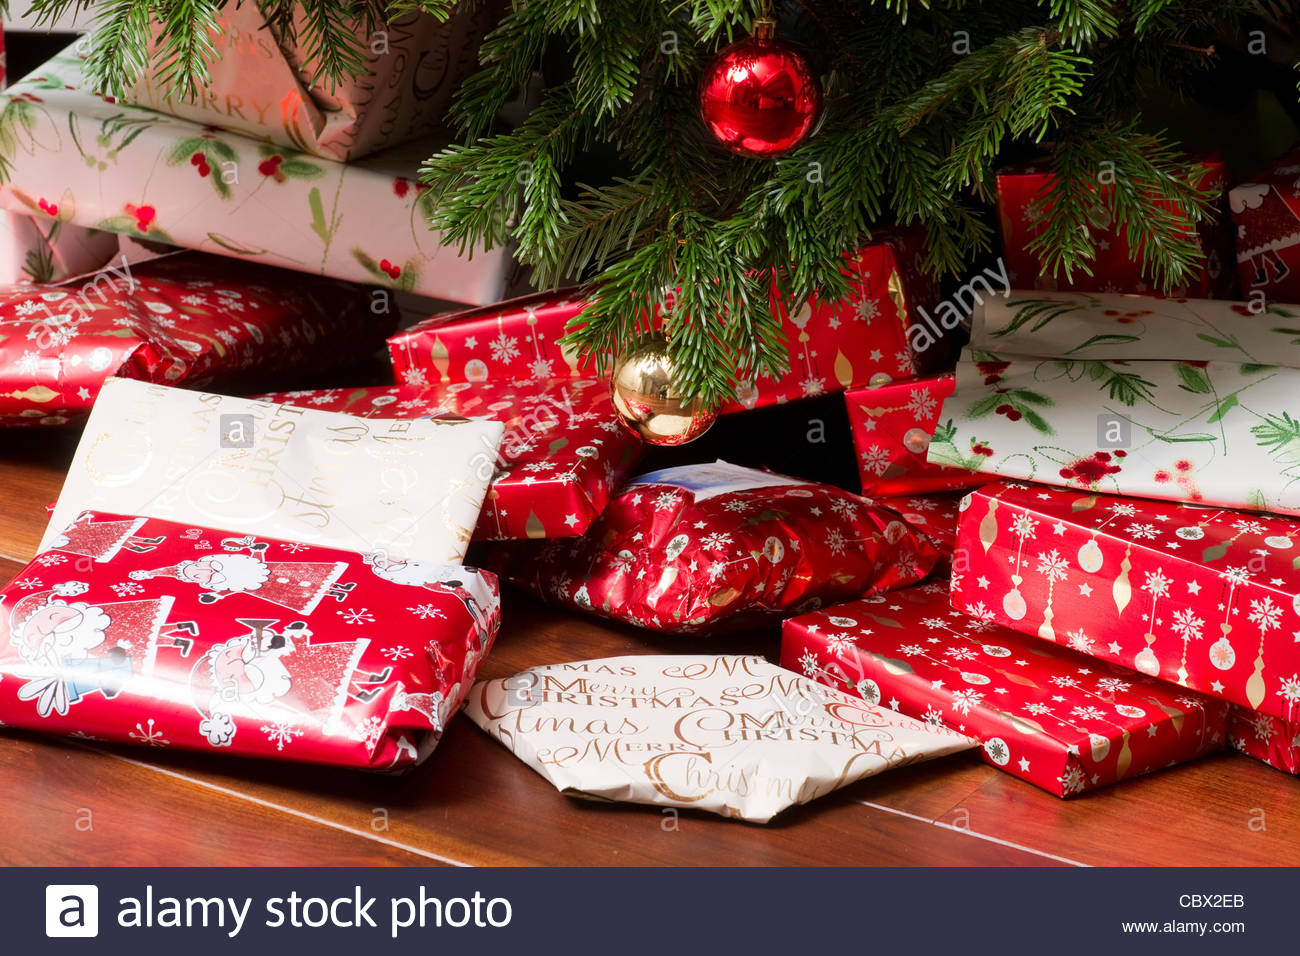 Christmas presents underneath a pine tree in a modern living room Stock Image